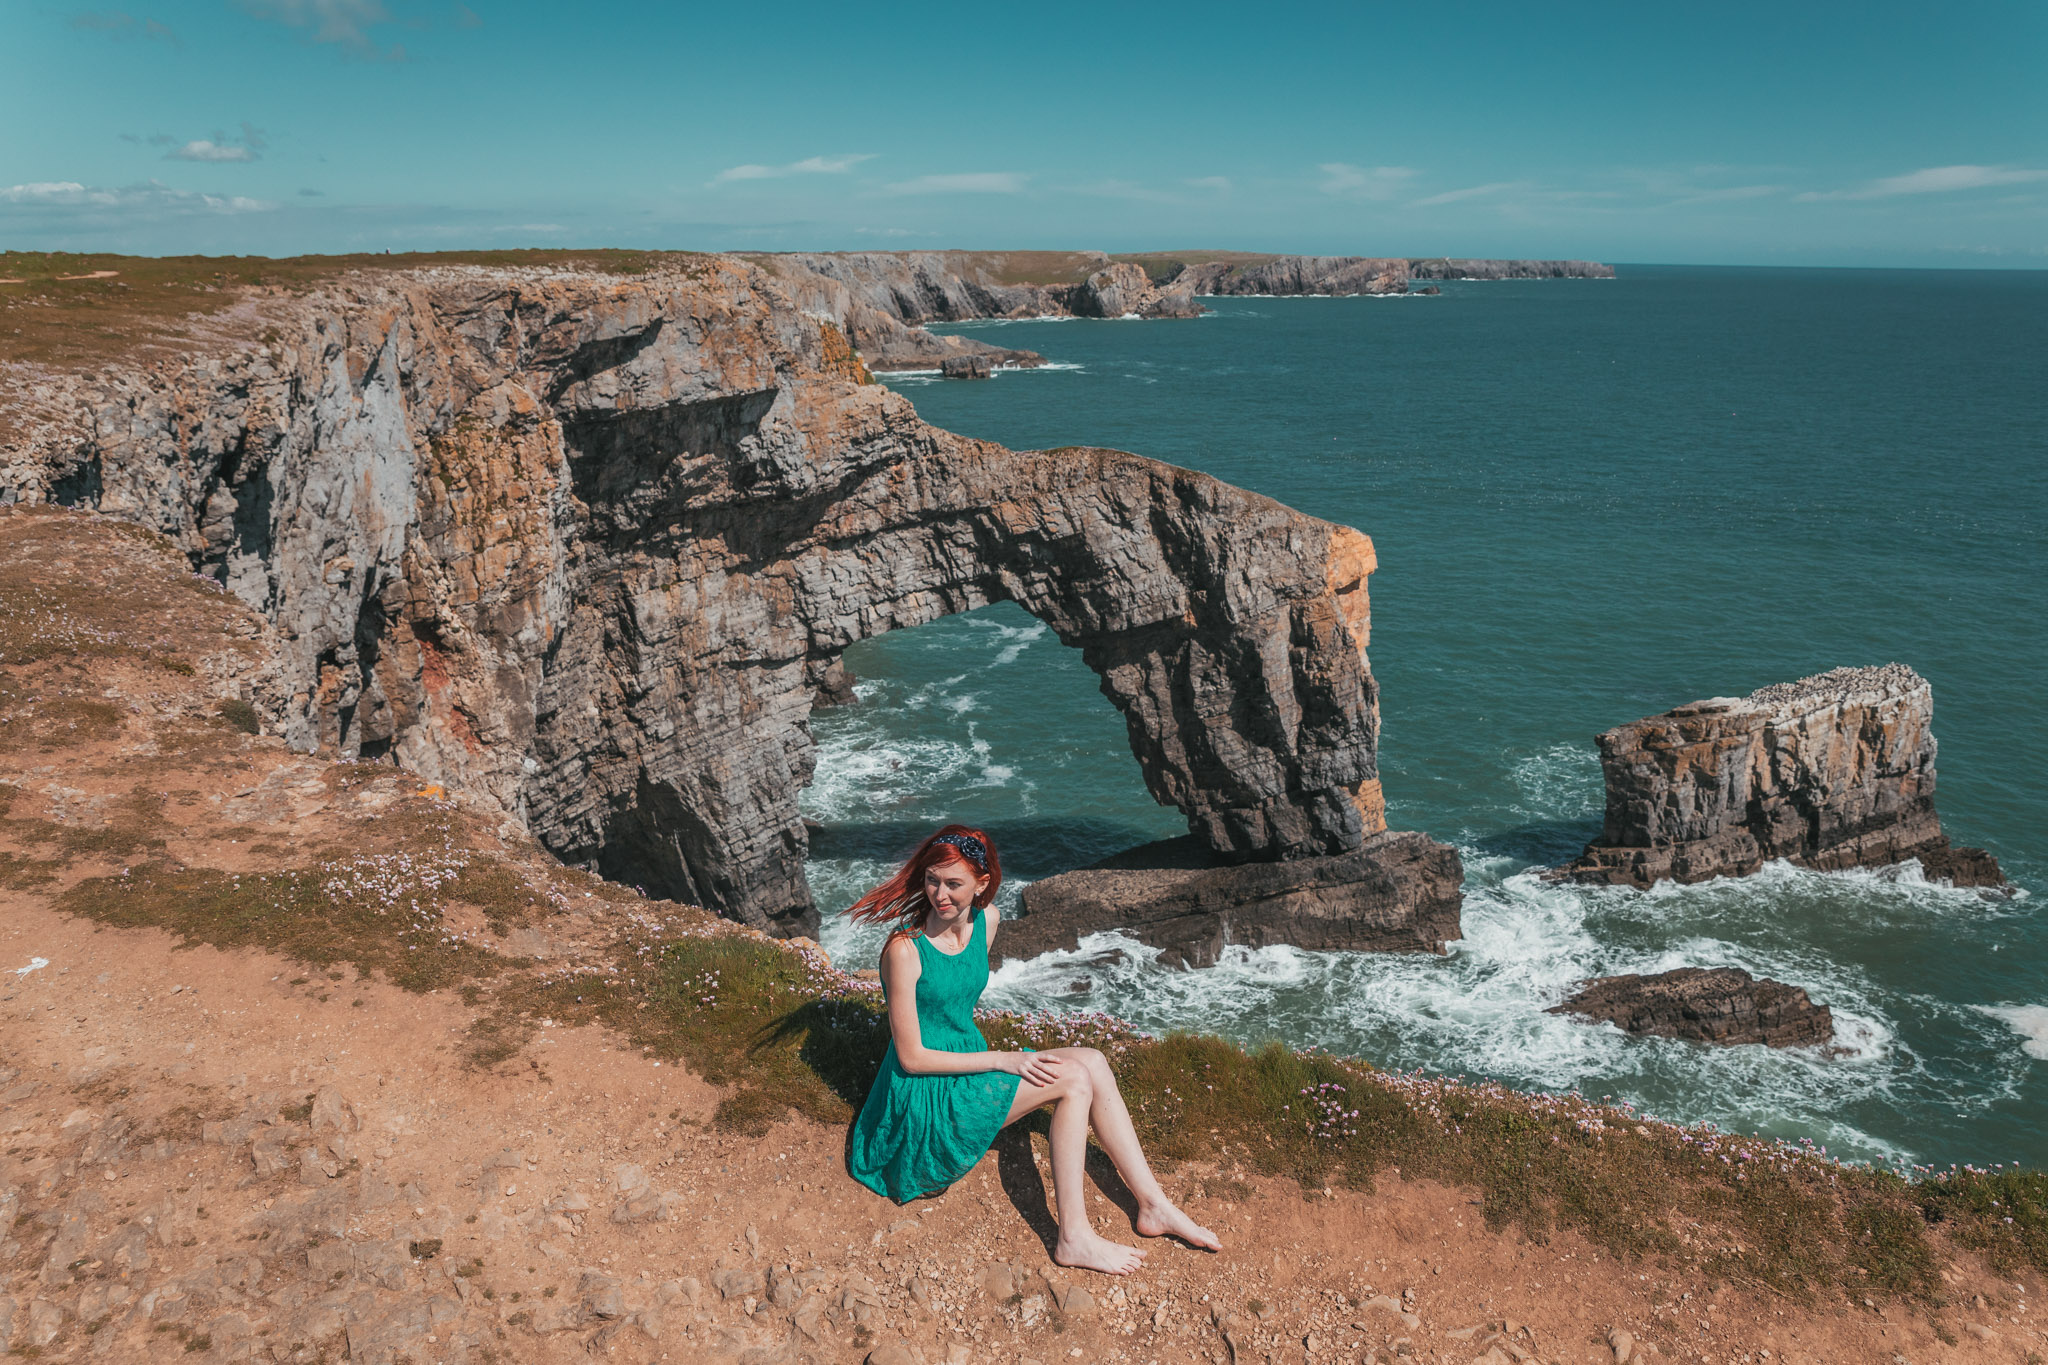 Green Bridge of Wales natural stone arch // The Most Beautiful Places to Visit in Wales // #readysetjetset #wales #uk #welsh #travel #photospots #blogpost